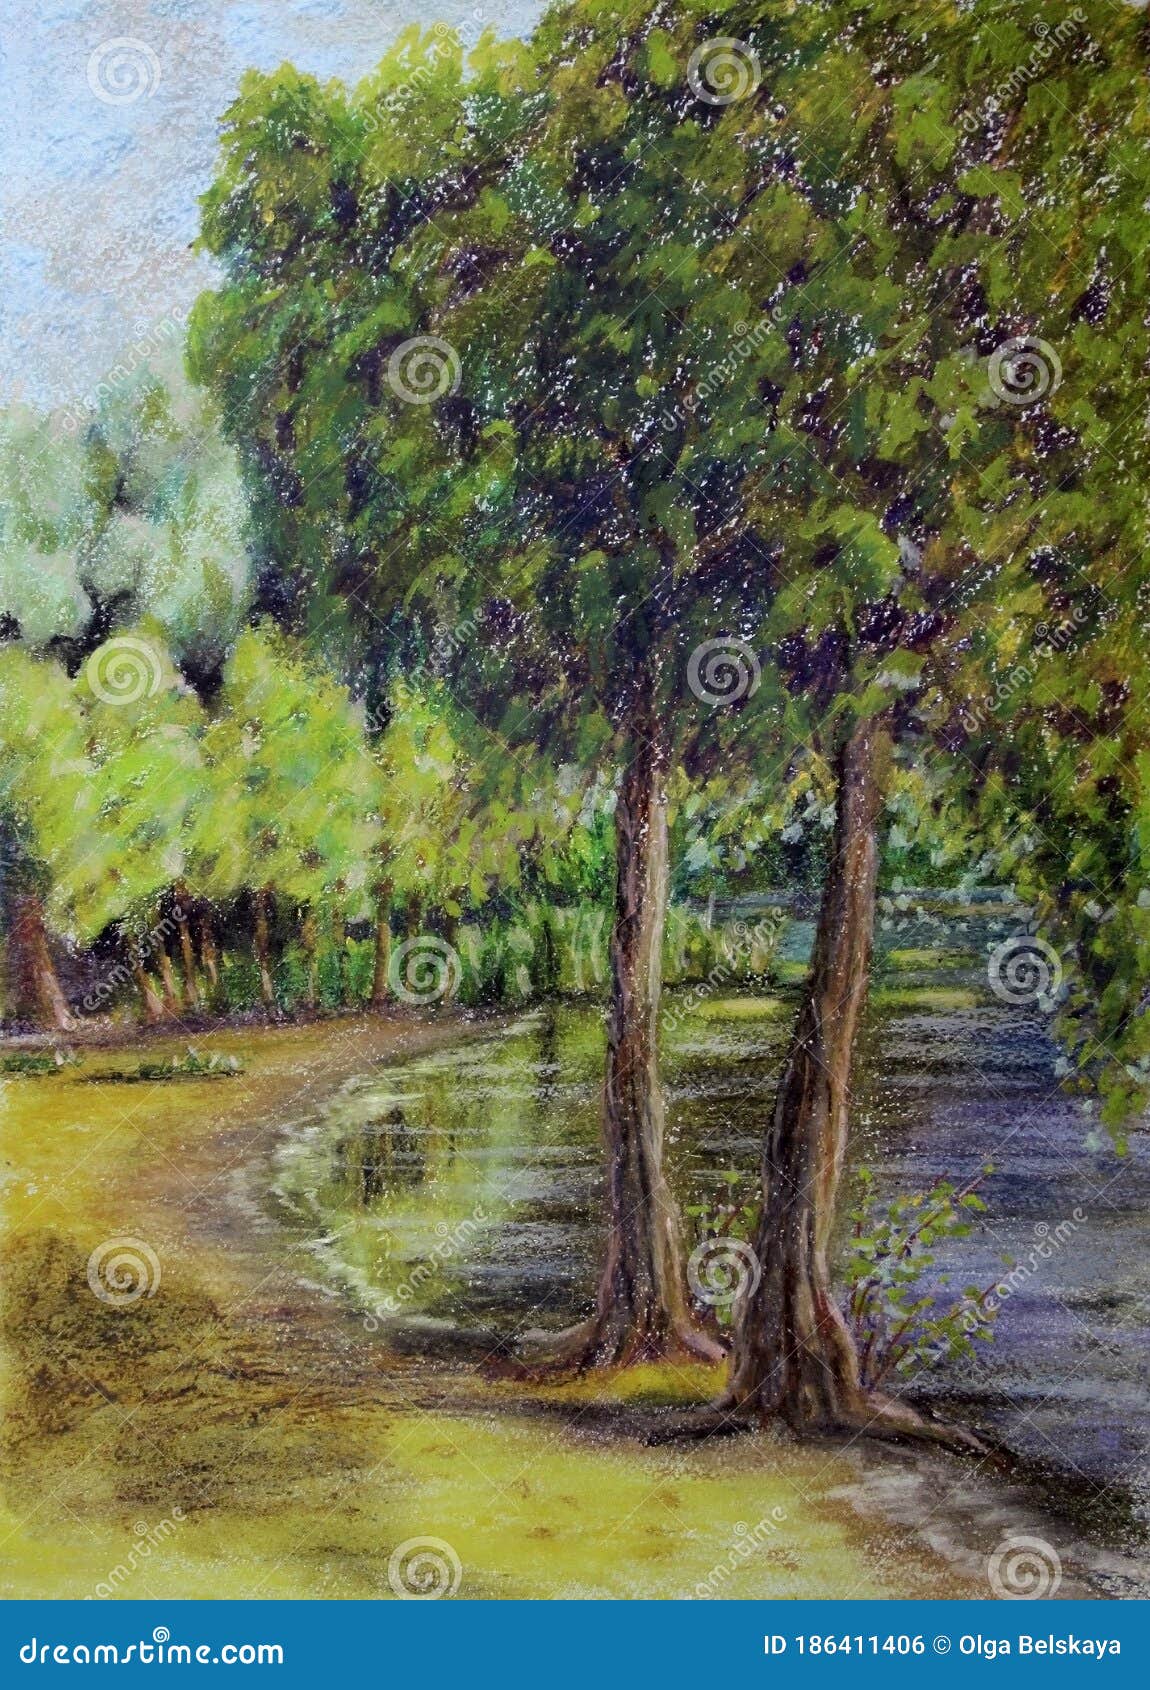 At a Lake. Landscape from Nature. Drawing Oil on Paper. Stock Illustration - Illustration of drawing, 186411406